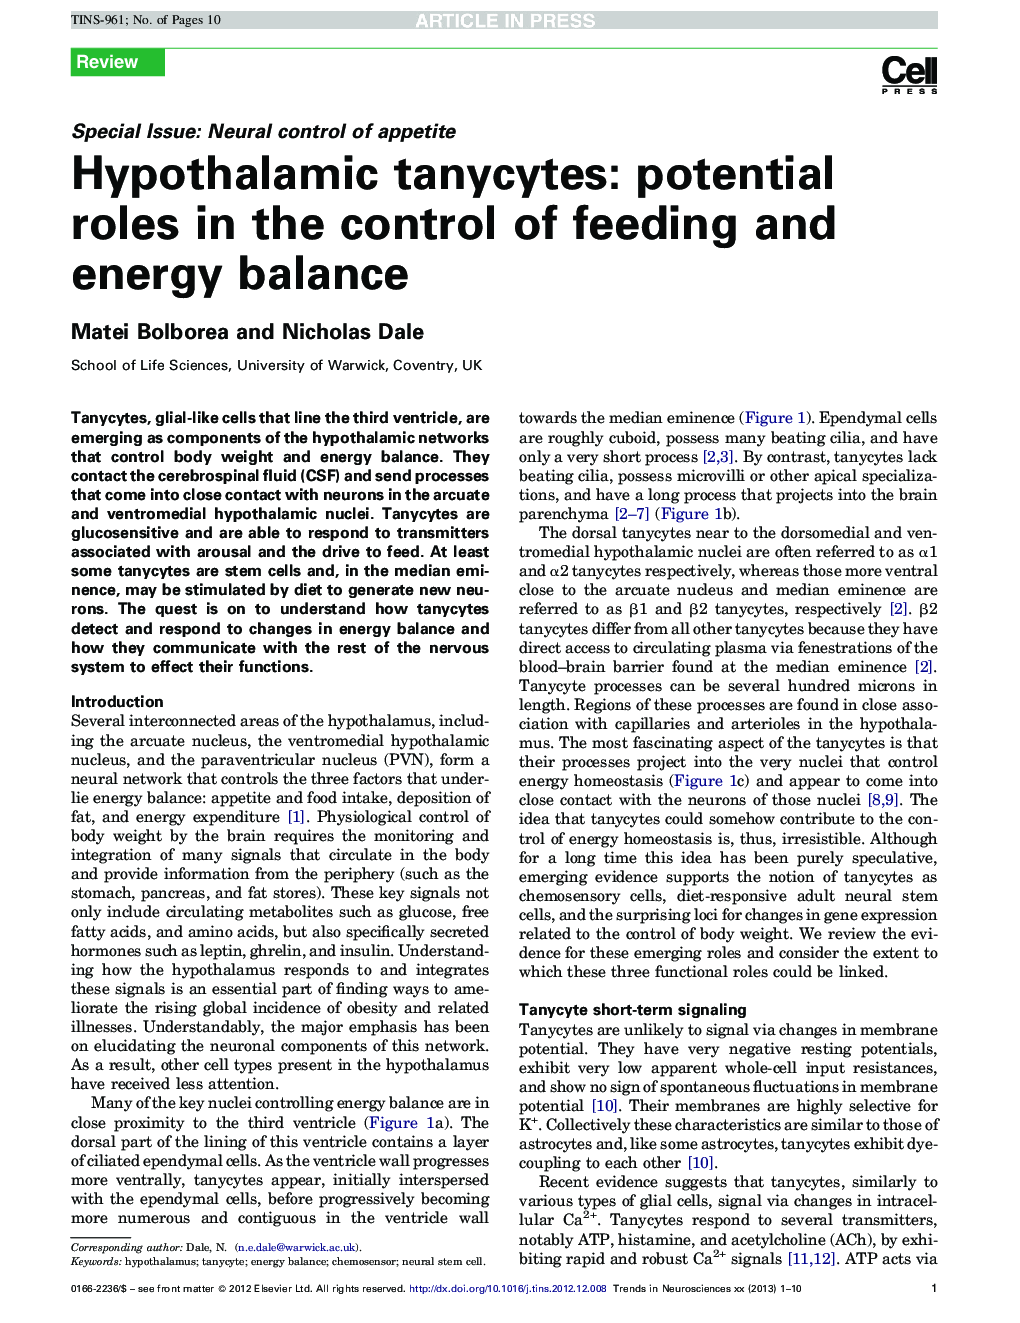 Hypothalamic tanycytes: potential roles in the control of feeding and energy balance